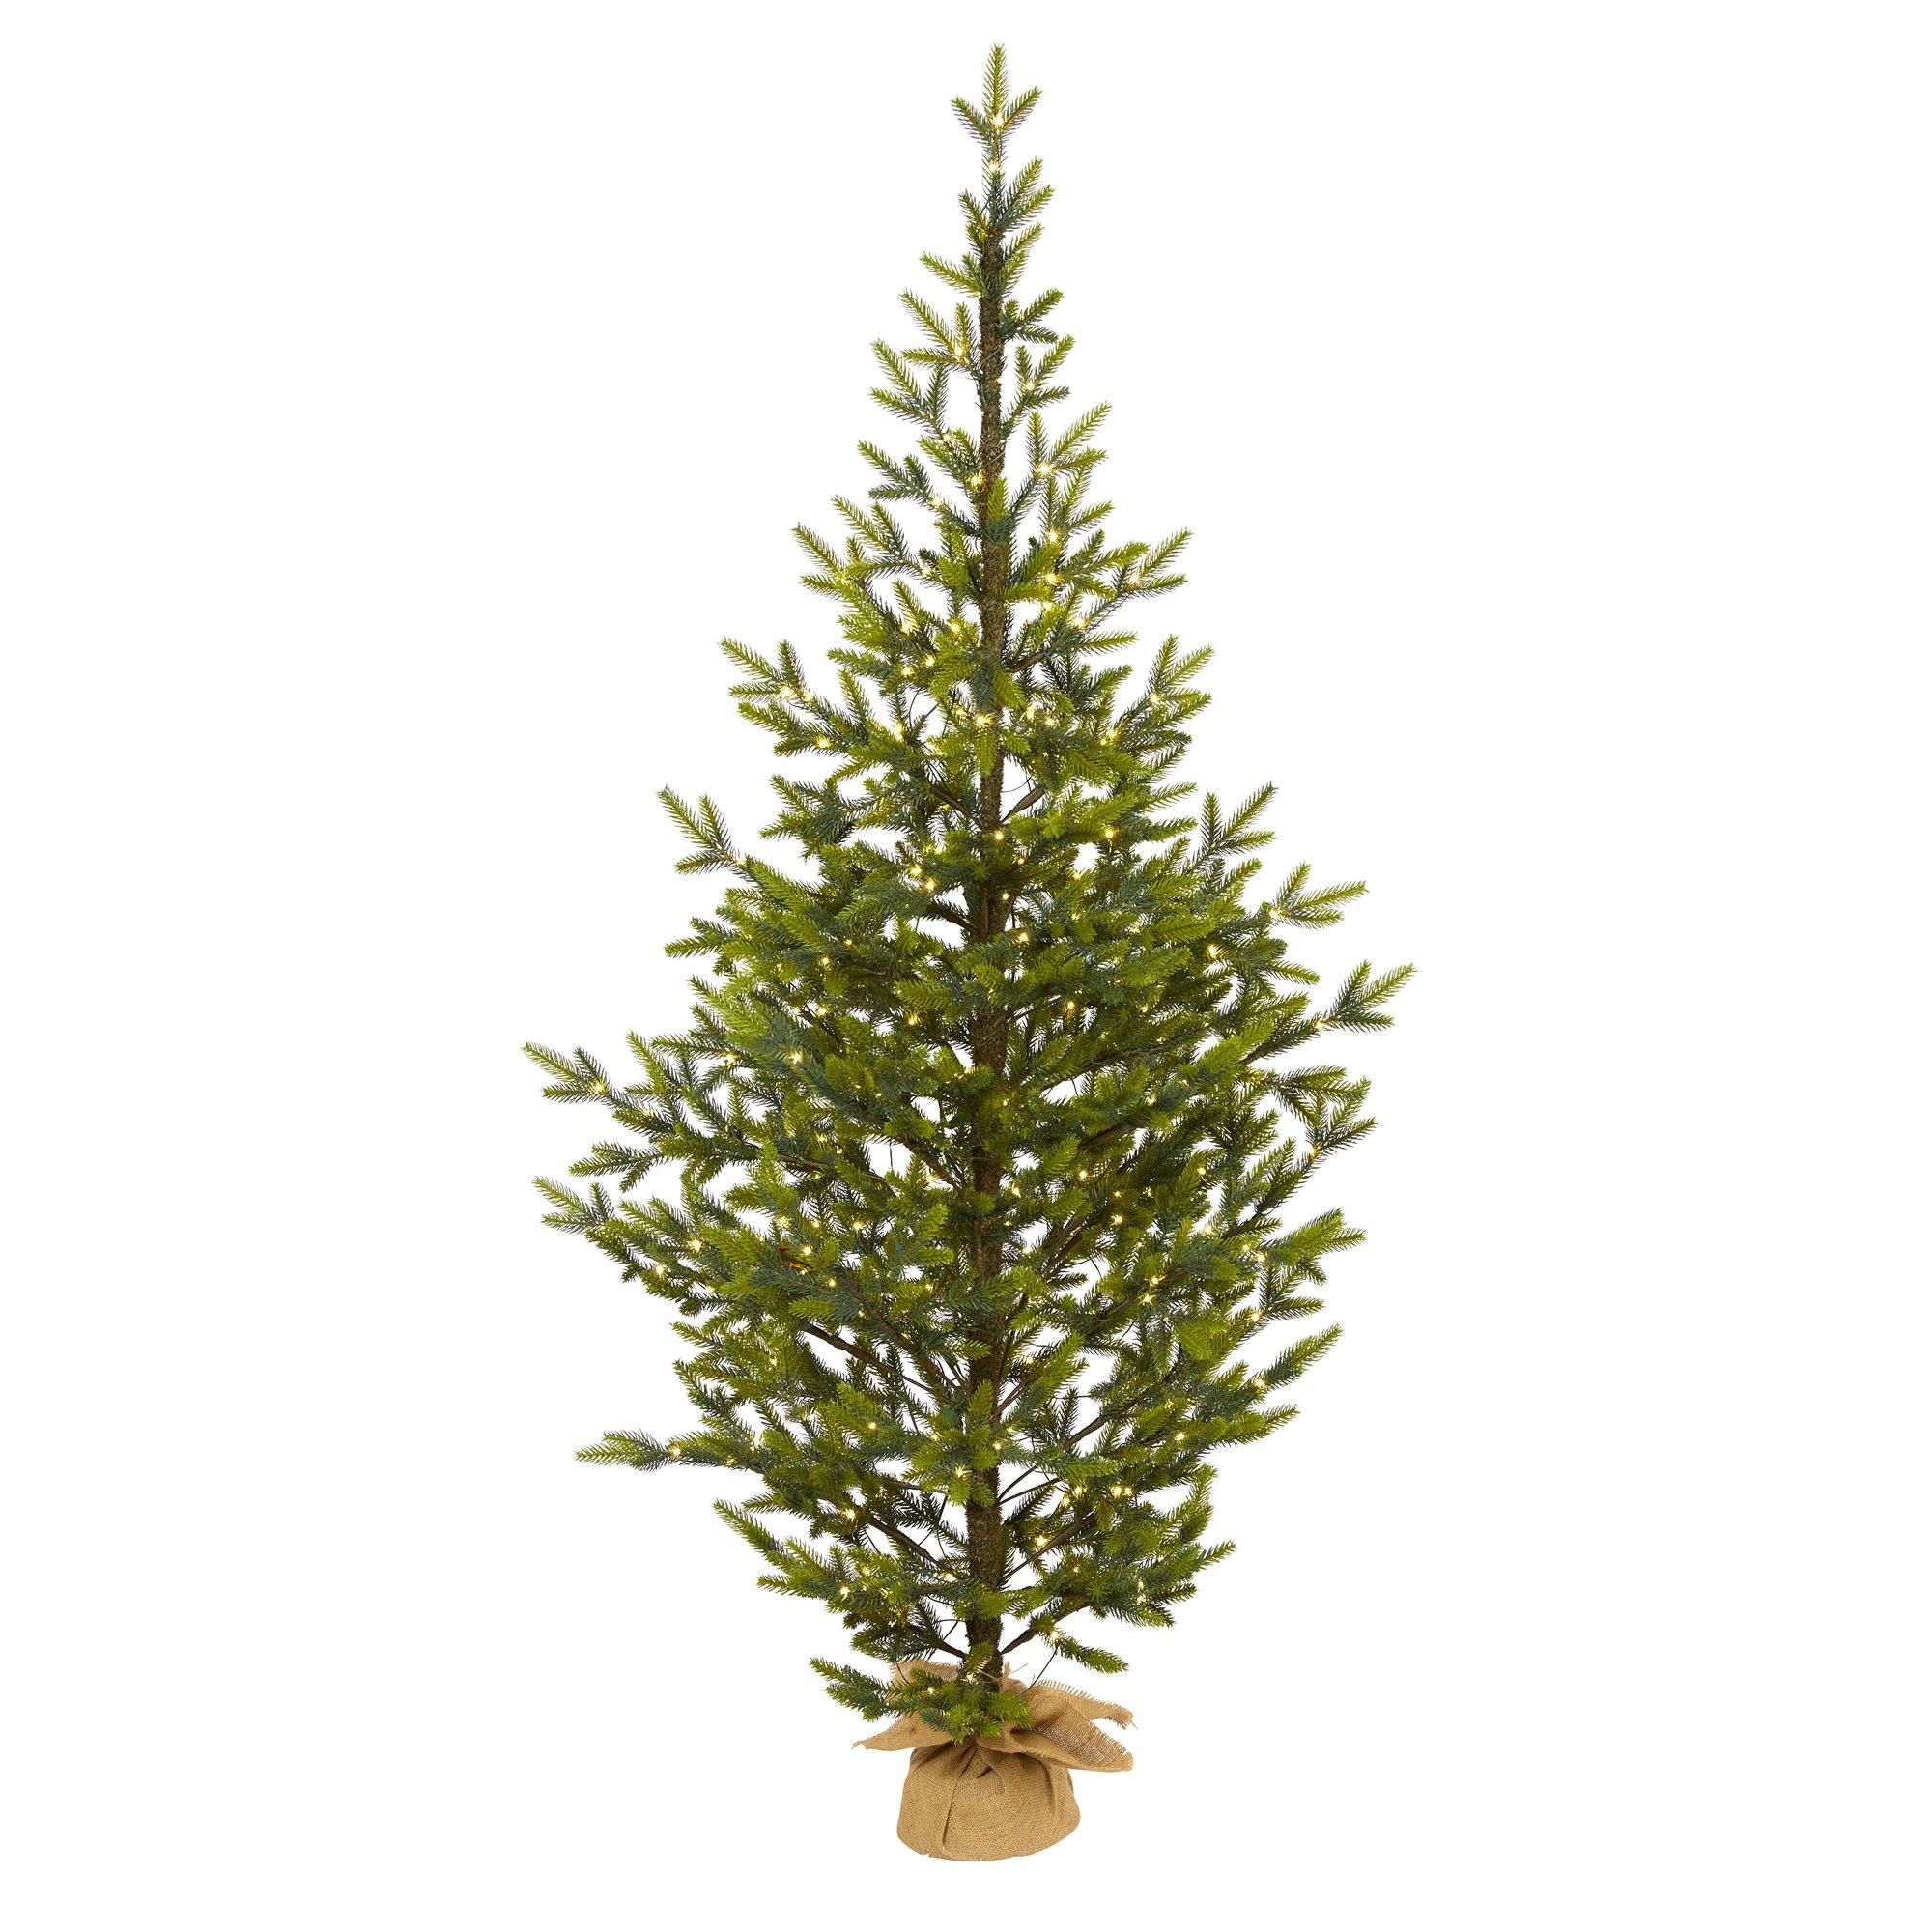 6’ Fraser Fir “Natural Look” Artificial Christmas Tree with 250 Clear LED Lights, a Burlap ... | Nearly Natural